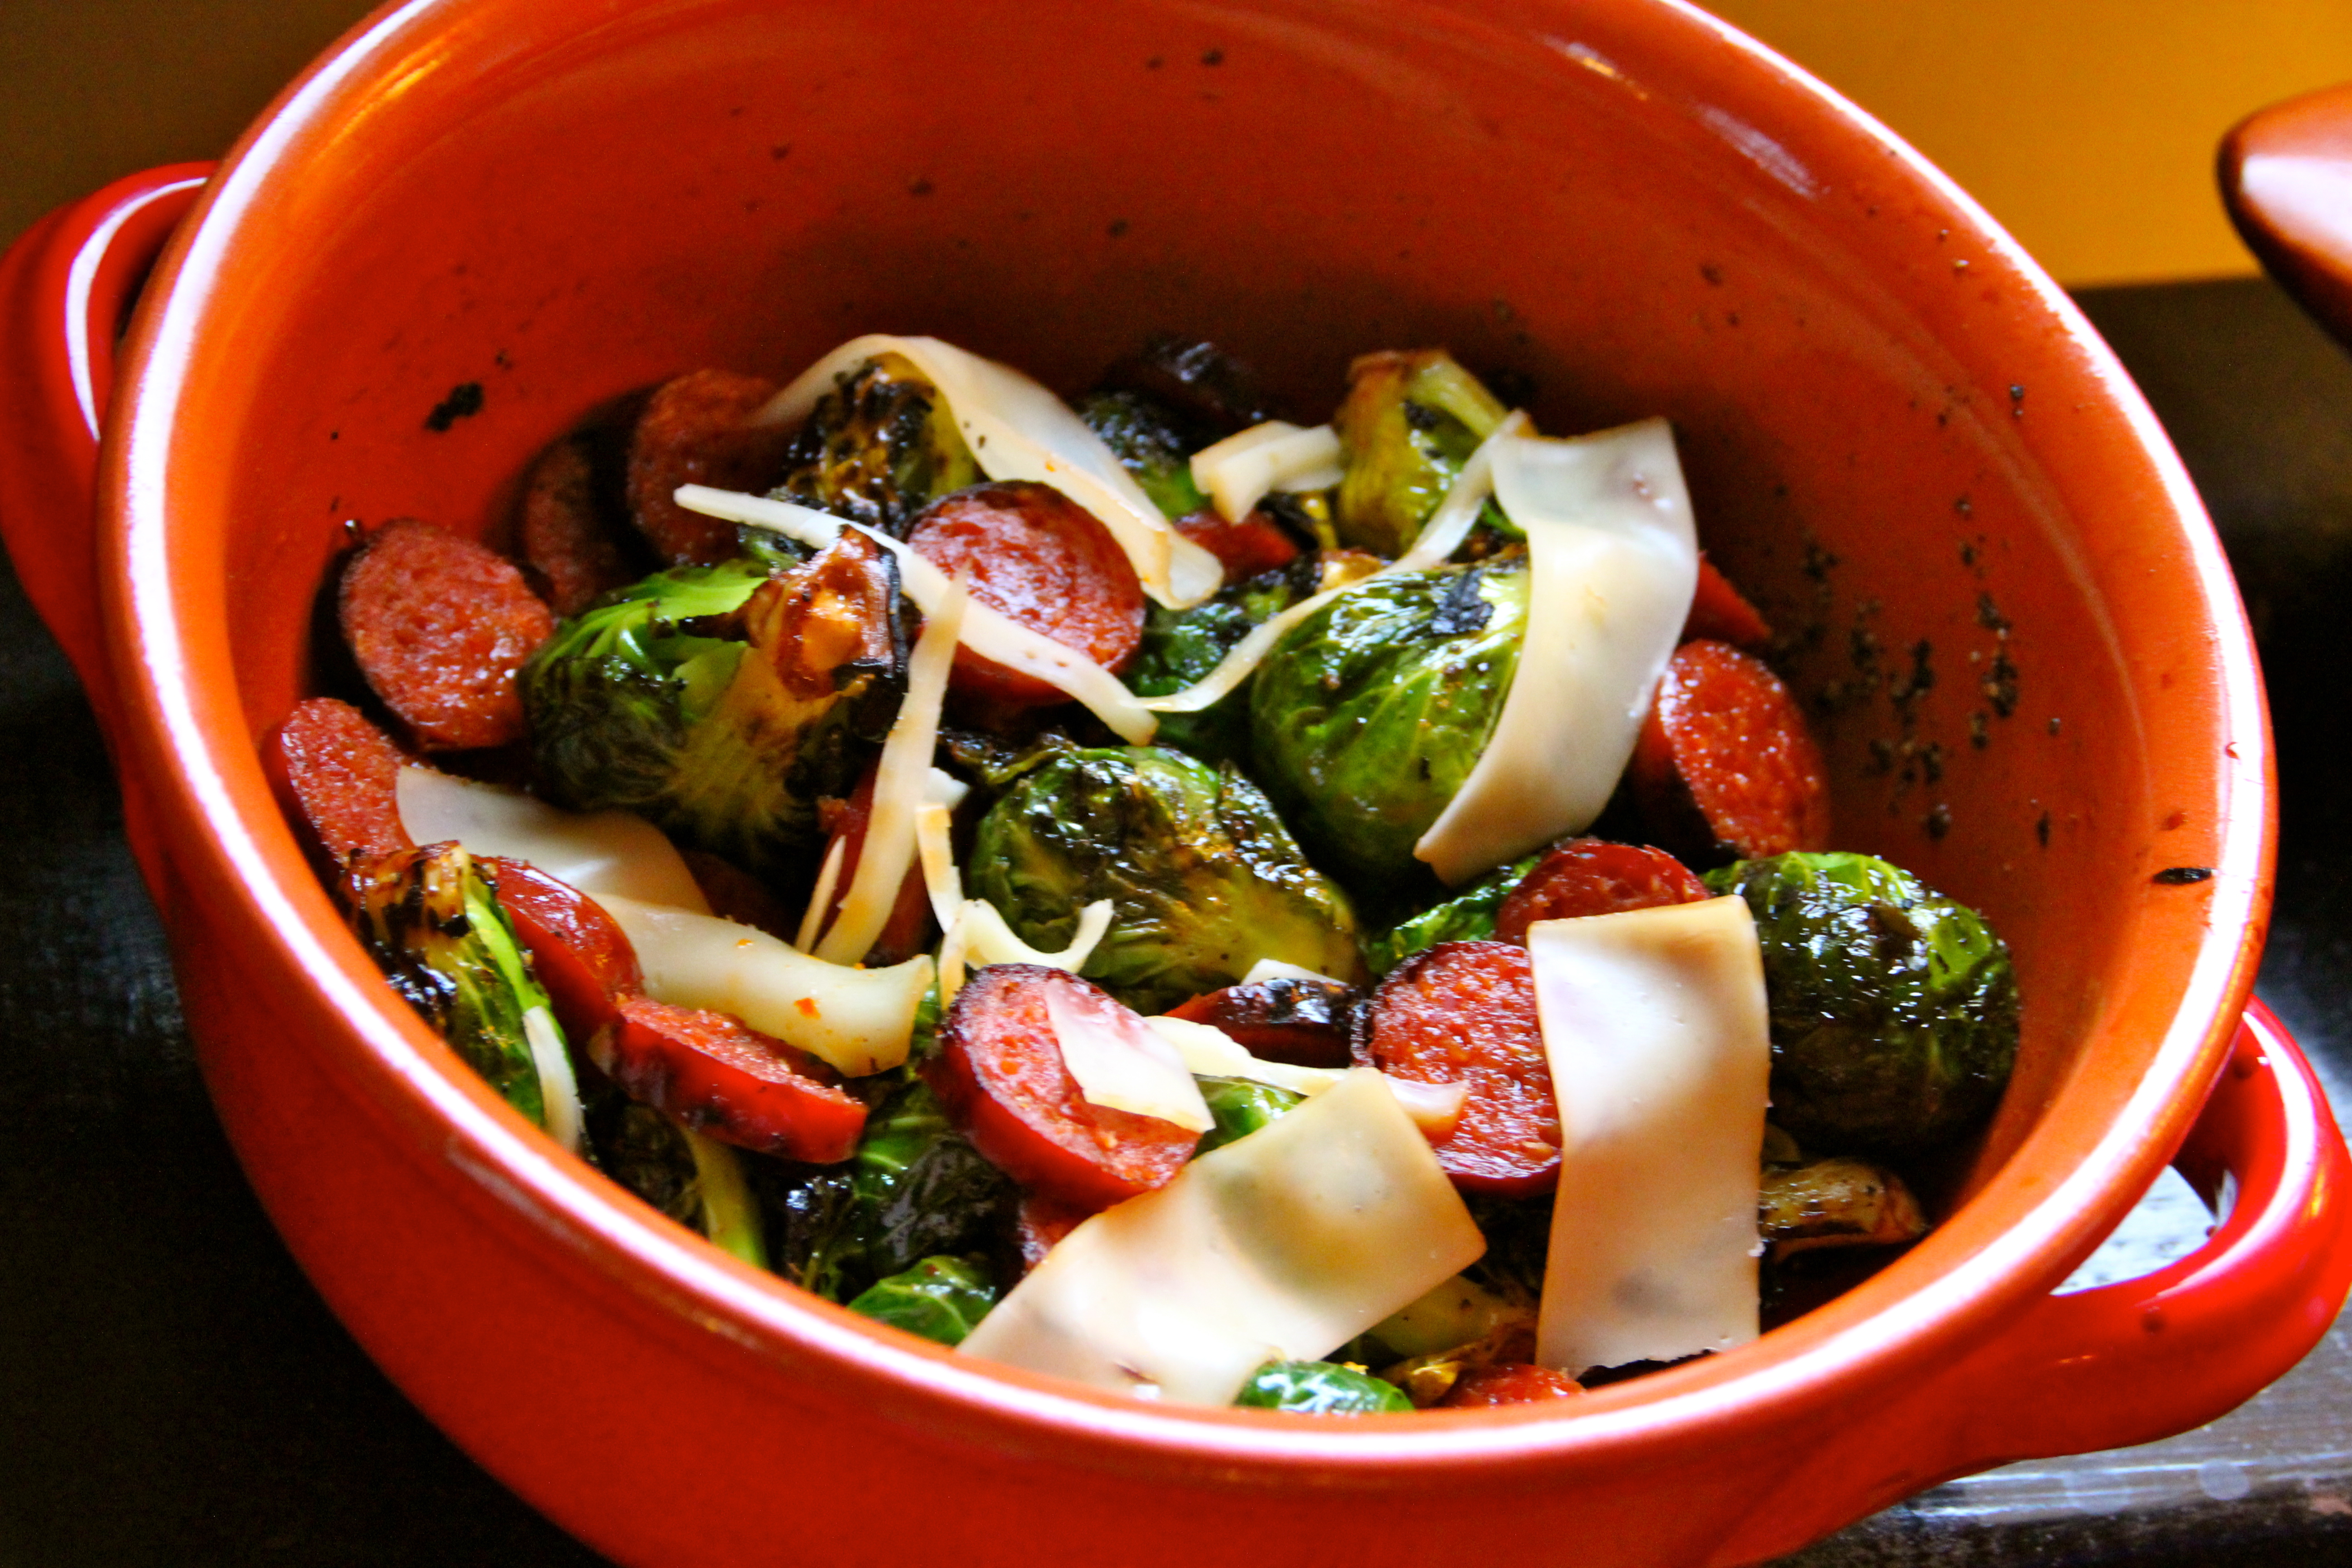 Marinated Grilled Brussels Sprouts